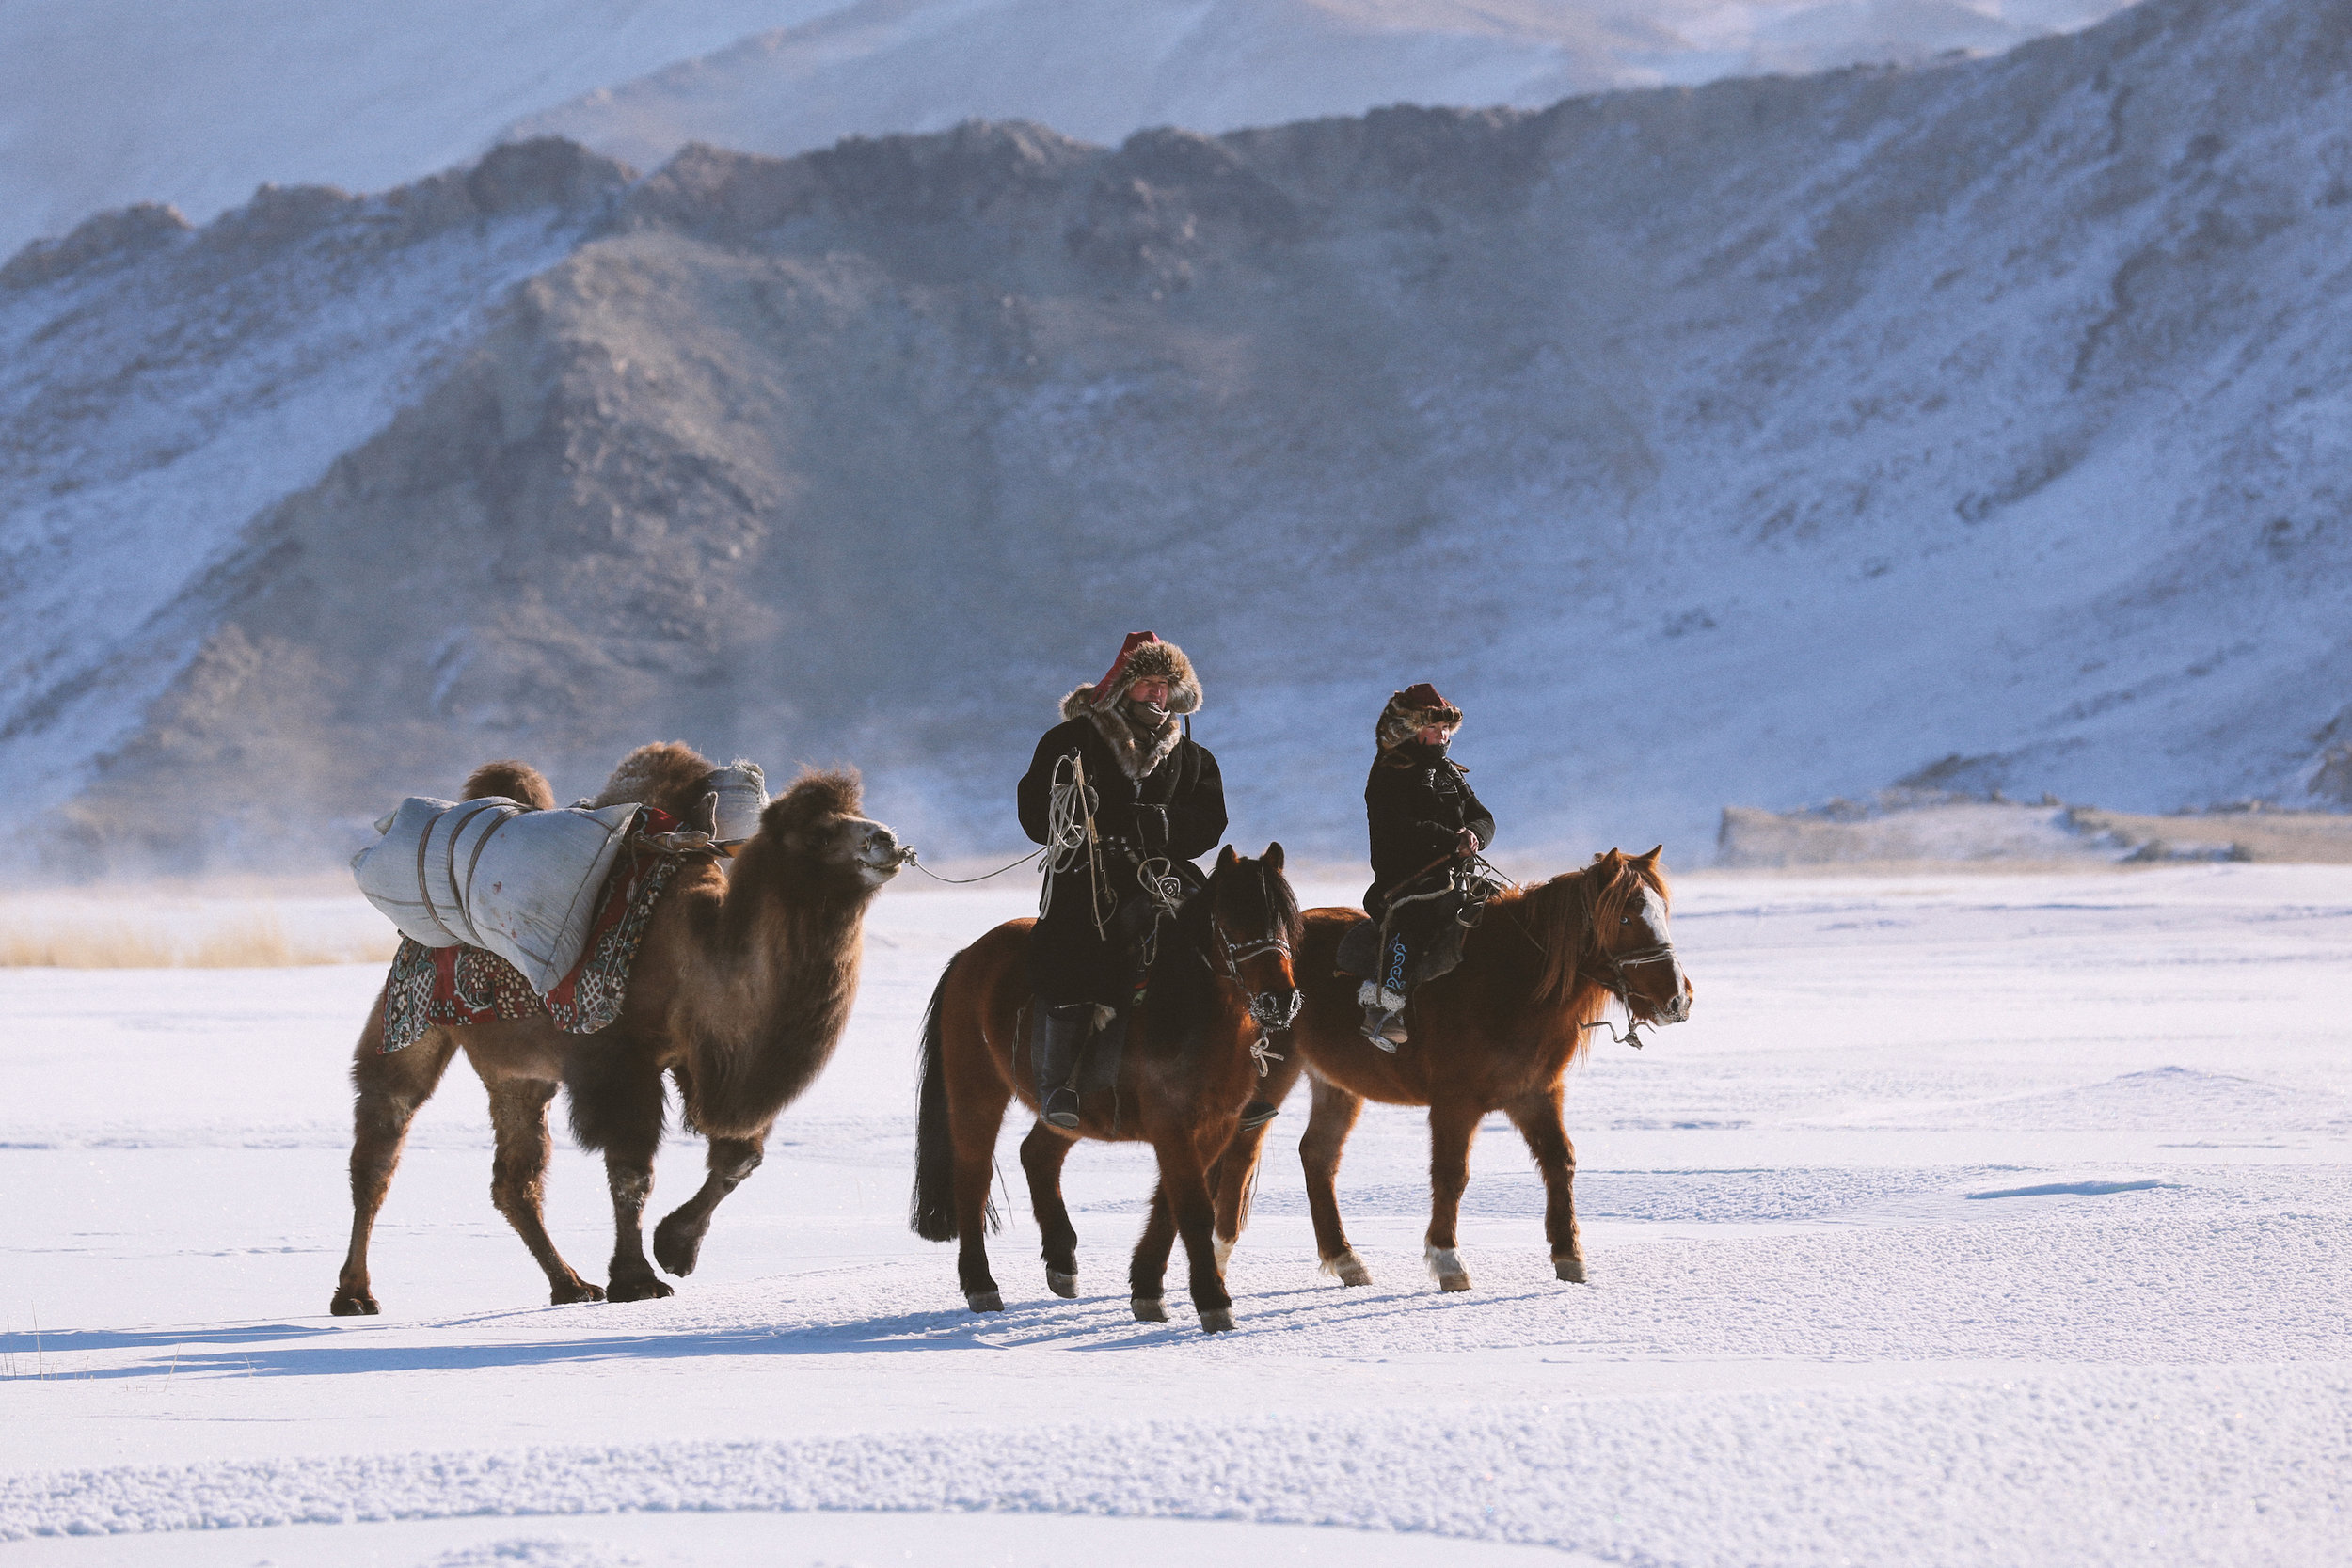 Auez (L) and his son Janibek, starting the winter migration in the Mongolia's Altai Mountains_BOY_NOMAD_Niobe_Thompson.jpg